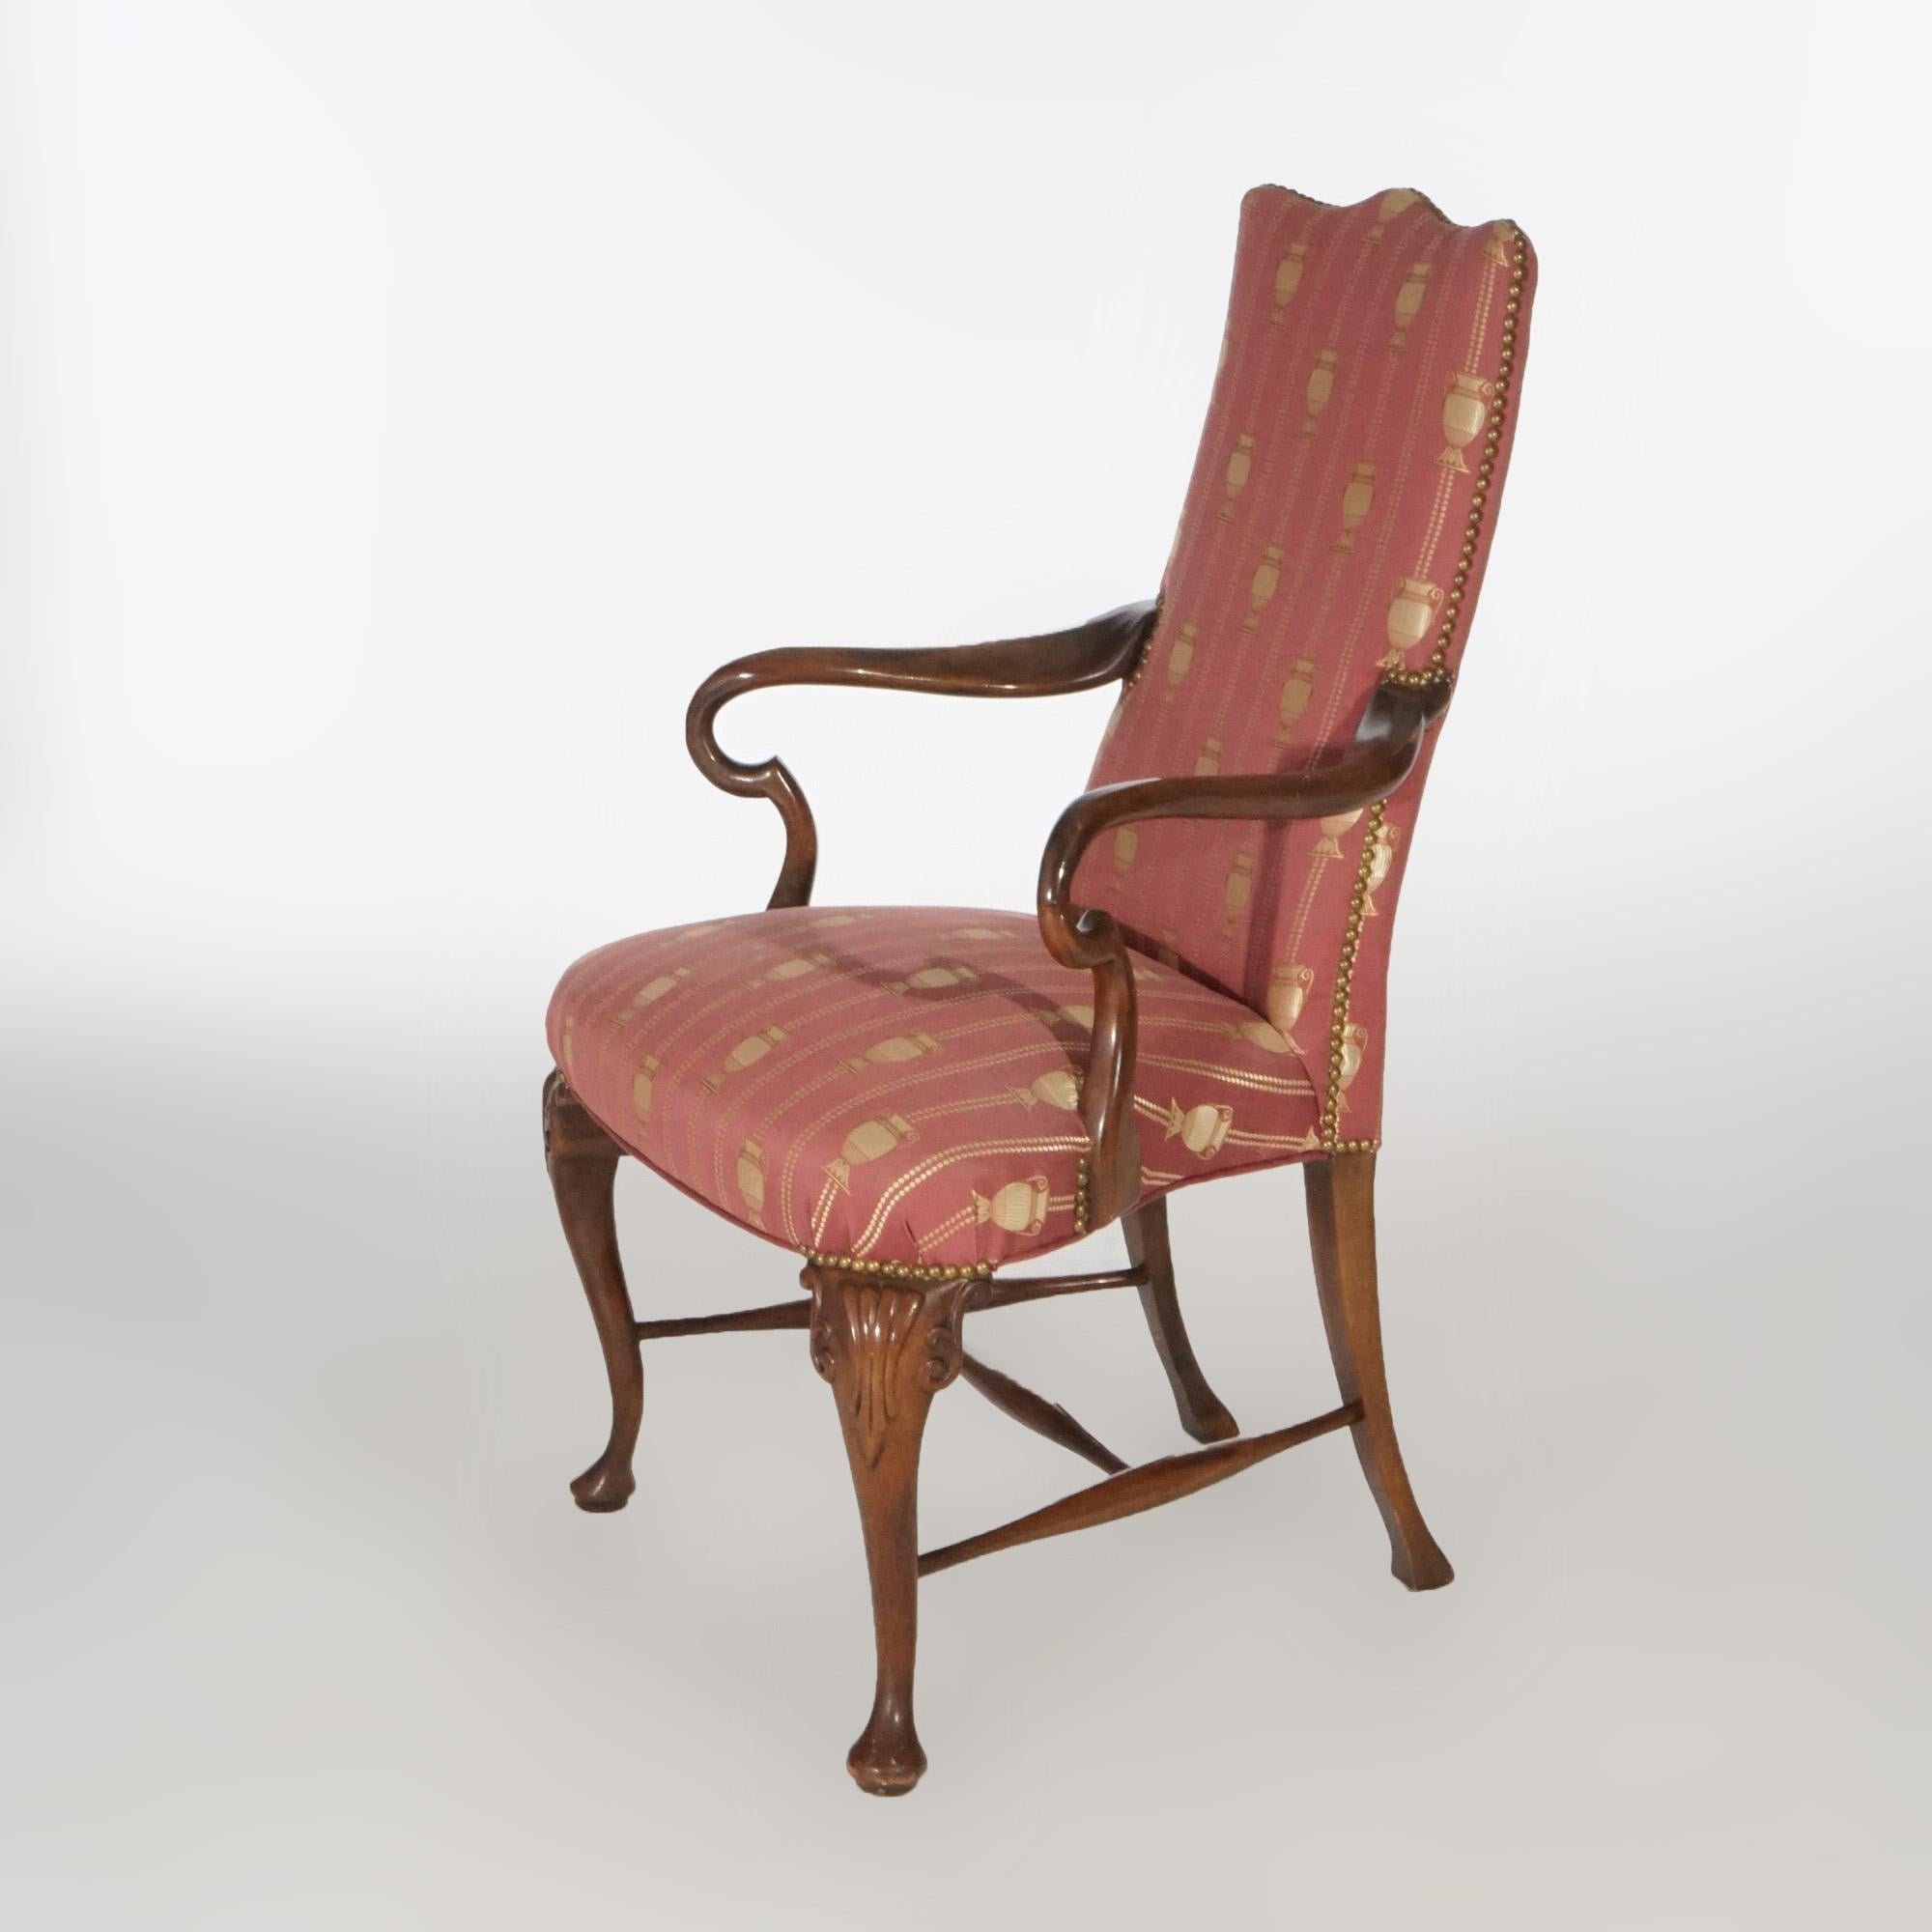 20th Century Queen Anne Style Mahogany Upholstered armchair, circa 1940